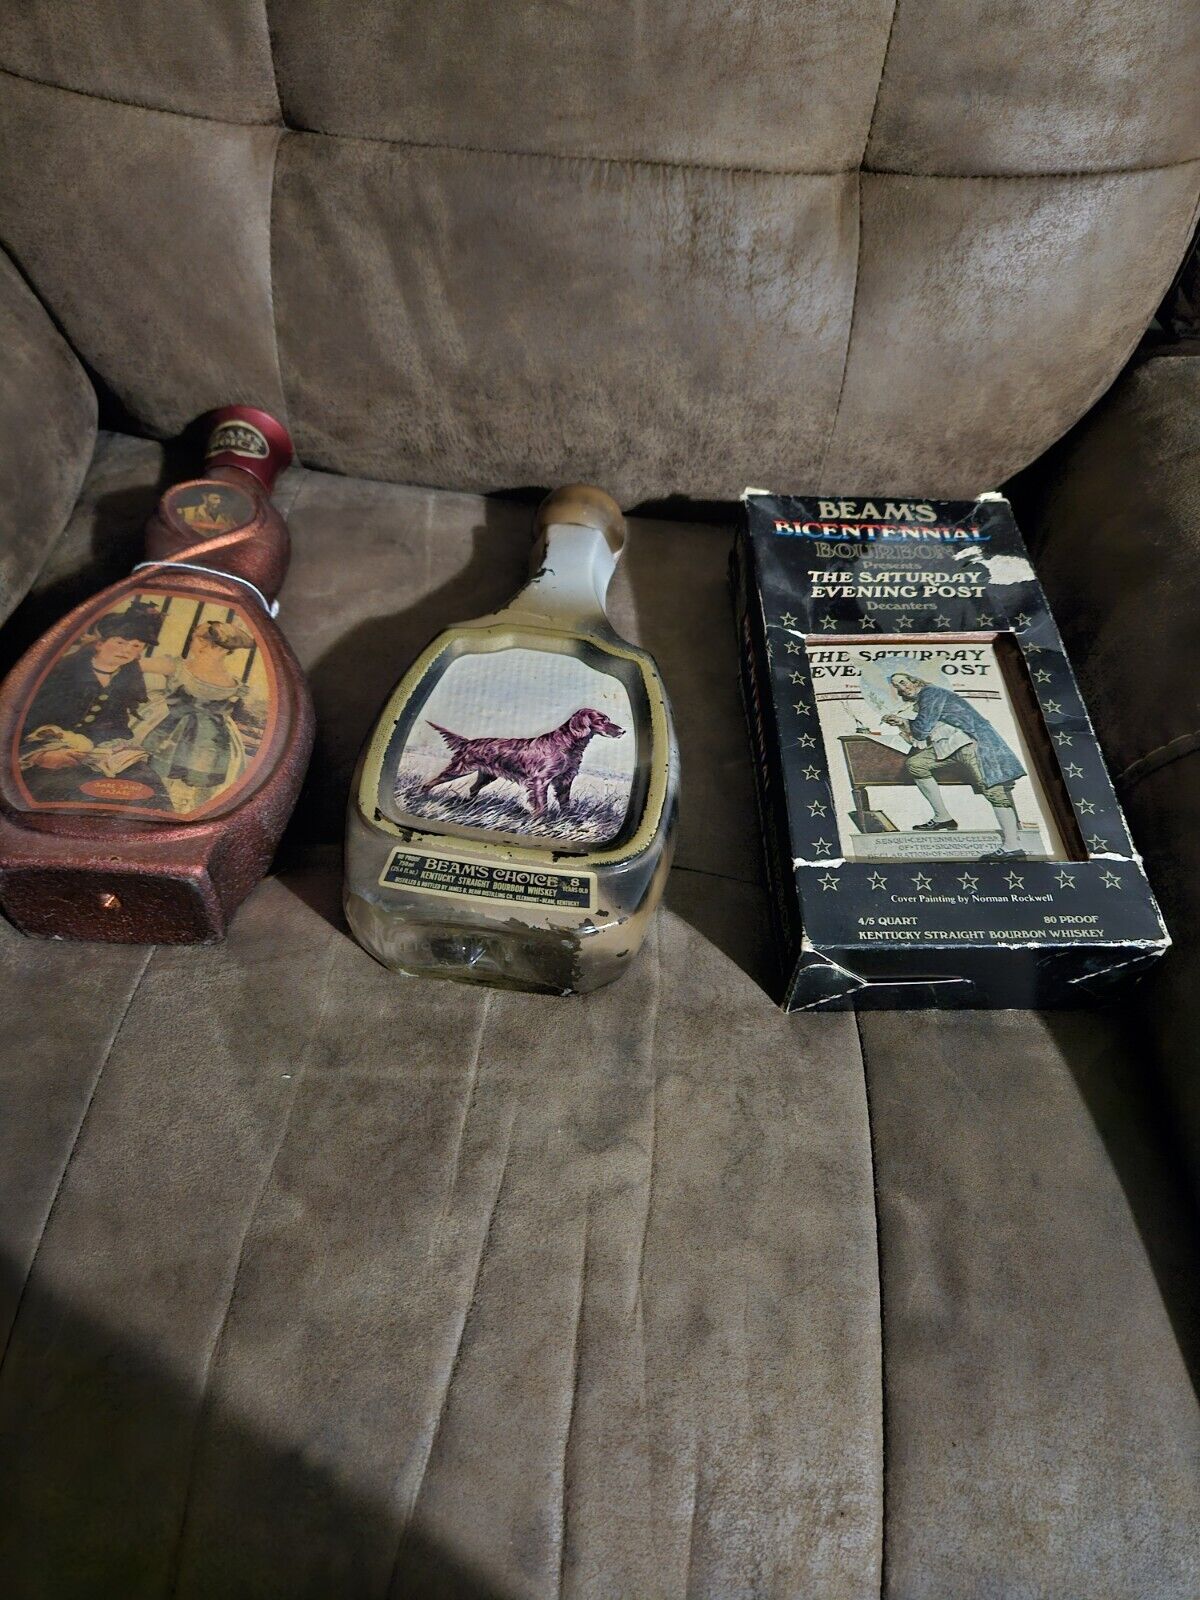 3  Vintage Jim Beam/Beam\'s Choice Decanter Bottles. 1 IOB, ALL WITH LOT NUMBERS